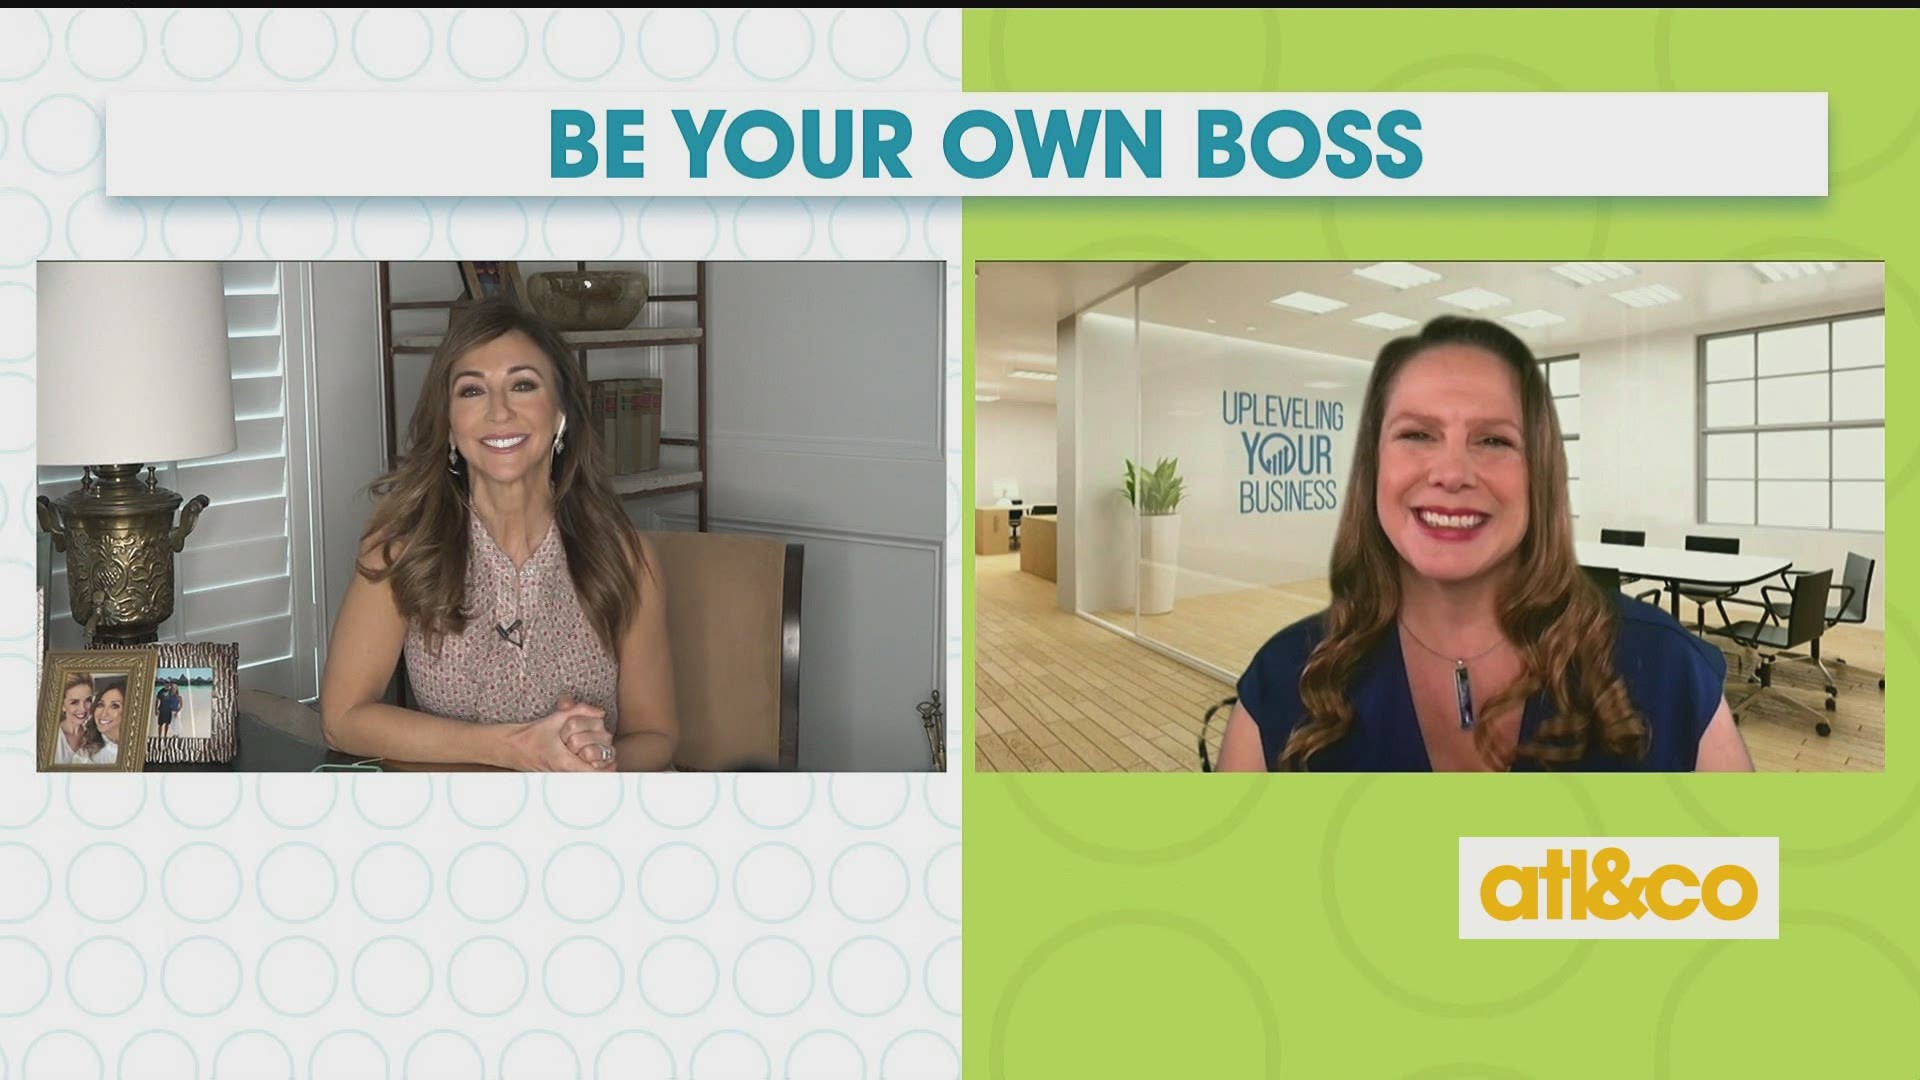 Author of 'Uplevel Your Business' Kristen David shares tips for reclaiming your time and succeeding in business.